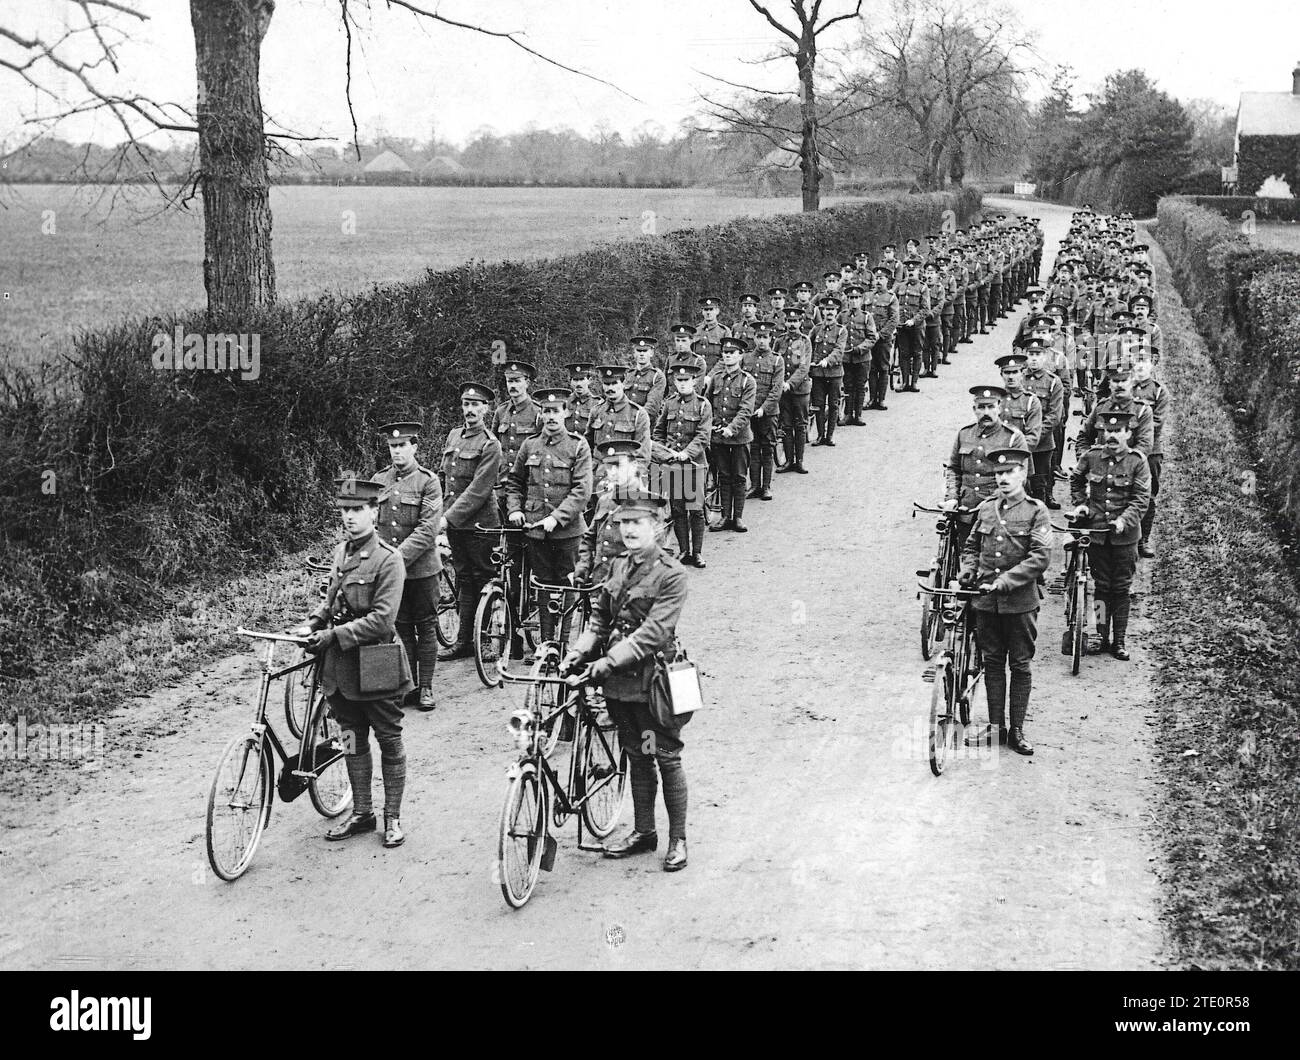 11/30/1914. An important element of the English army. British Cycling Explorers Who Are Providing Remarkable Services. Credit: Album / Archivo ABC / Vidal Stock Photo